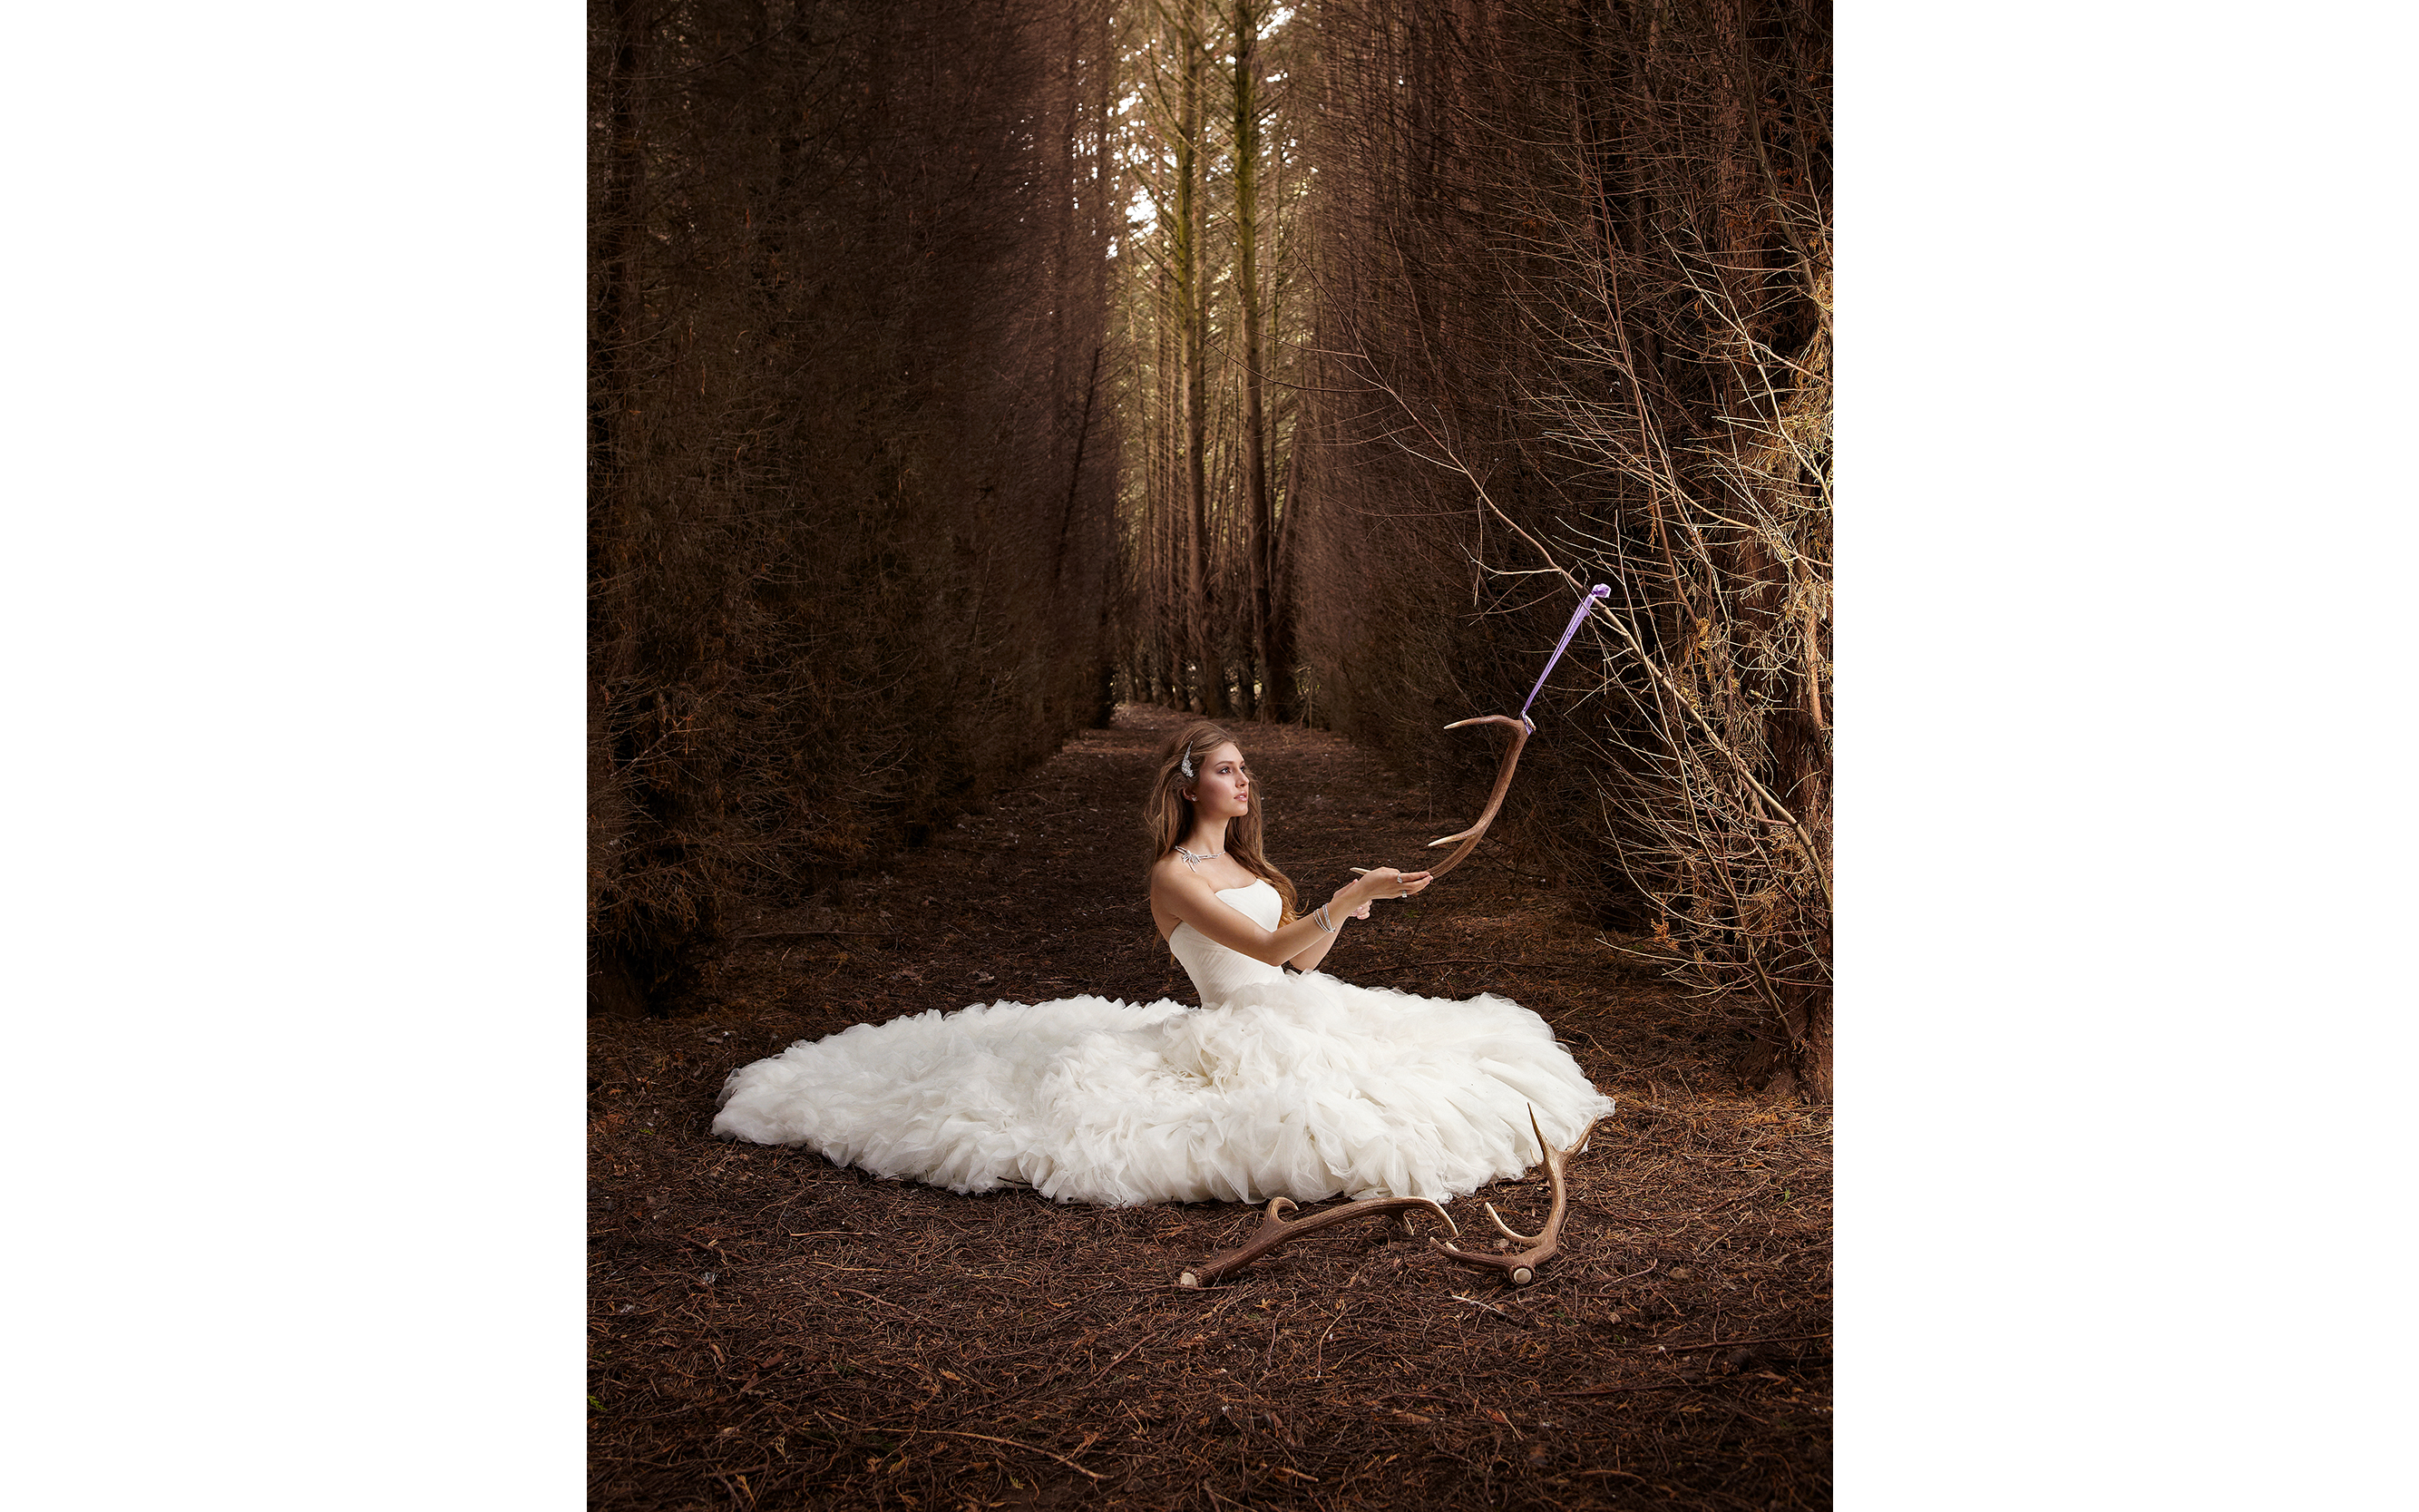 Model sitting down in a forest holding deer antlers looking at bright light coming from the trees